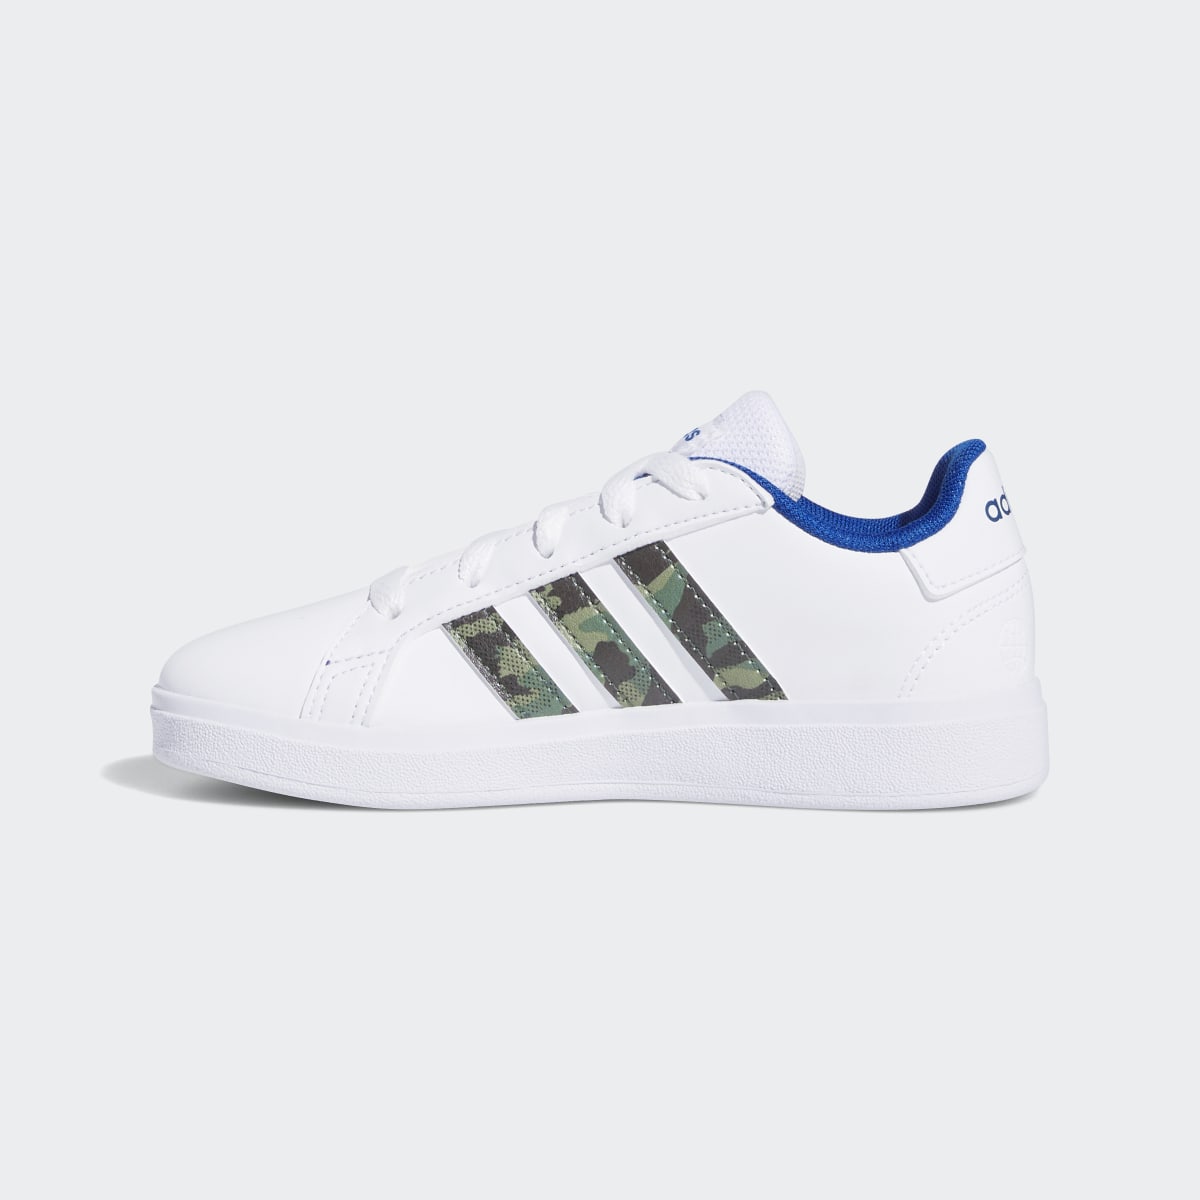 Adidas Grand Court Lifestyle Lace Tennis Shoes. 7